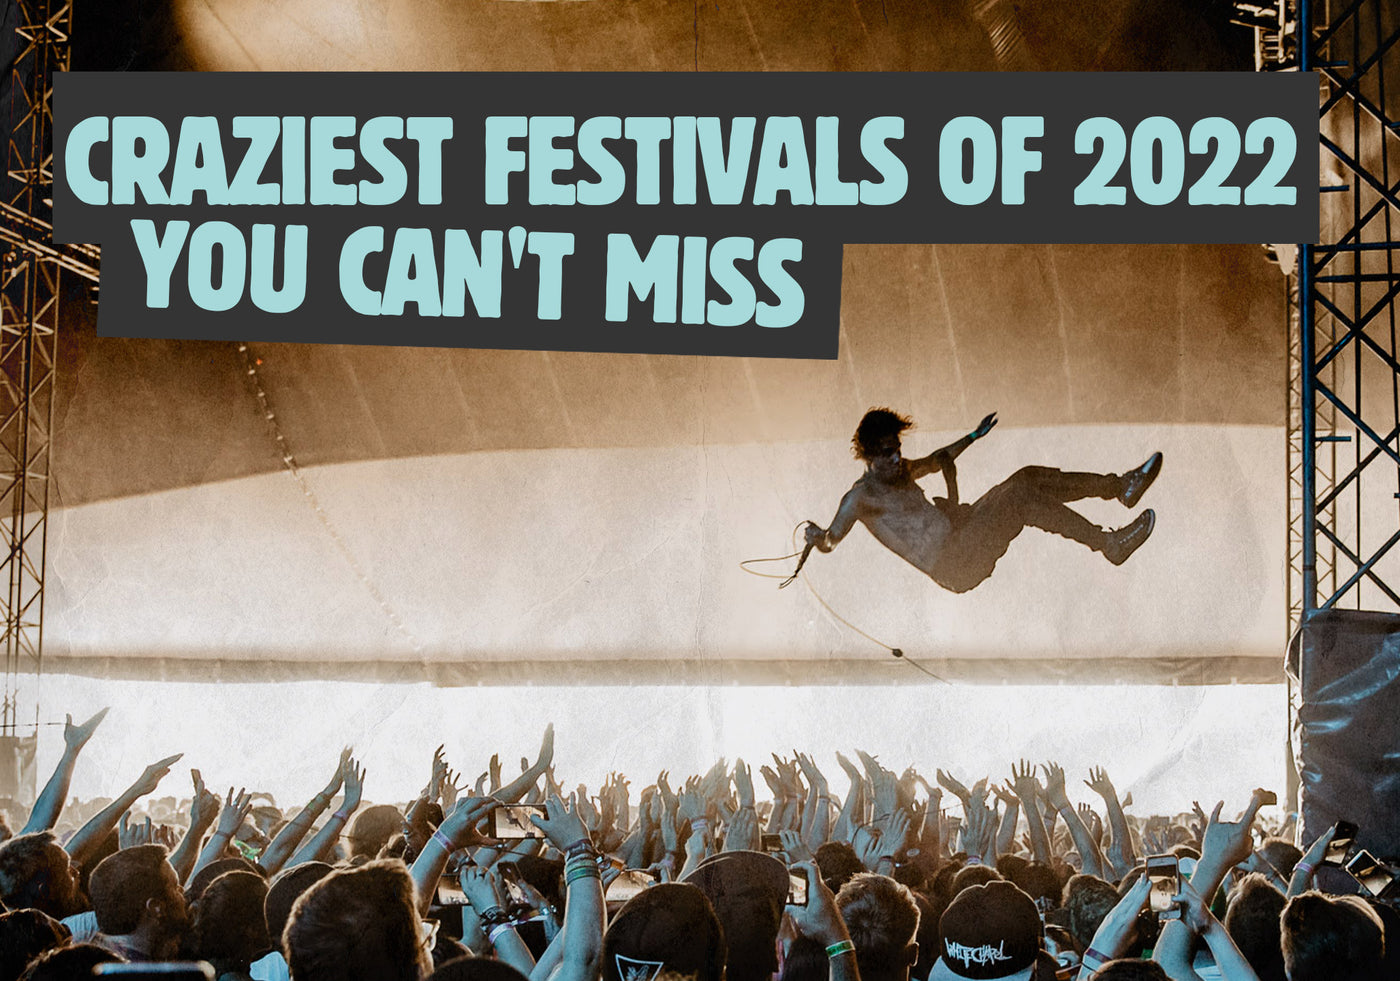 CRAZIEST FESTIVALS OF 2022 YOU CAN'T MISS 🤘🏼 🔥